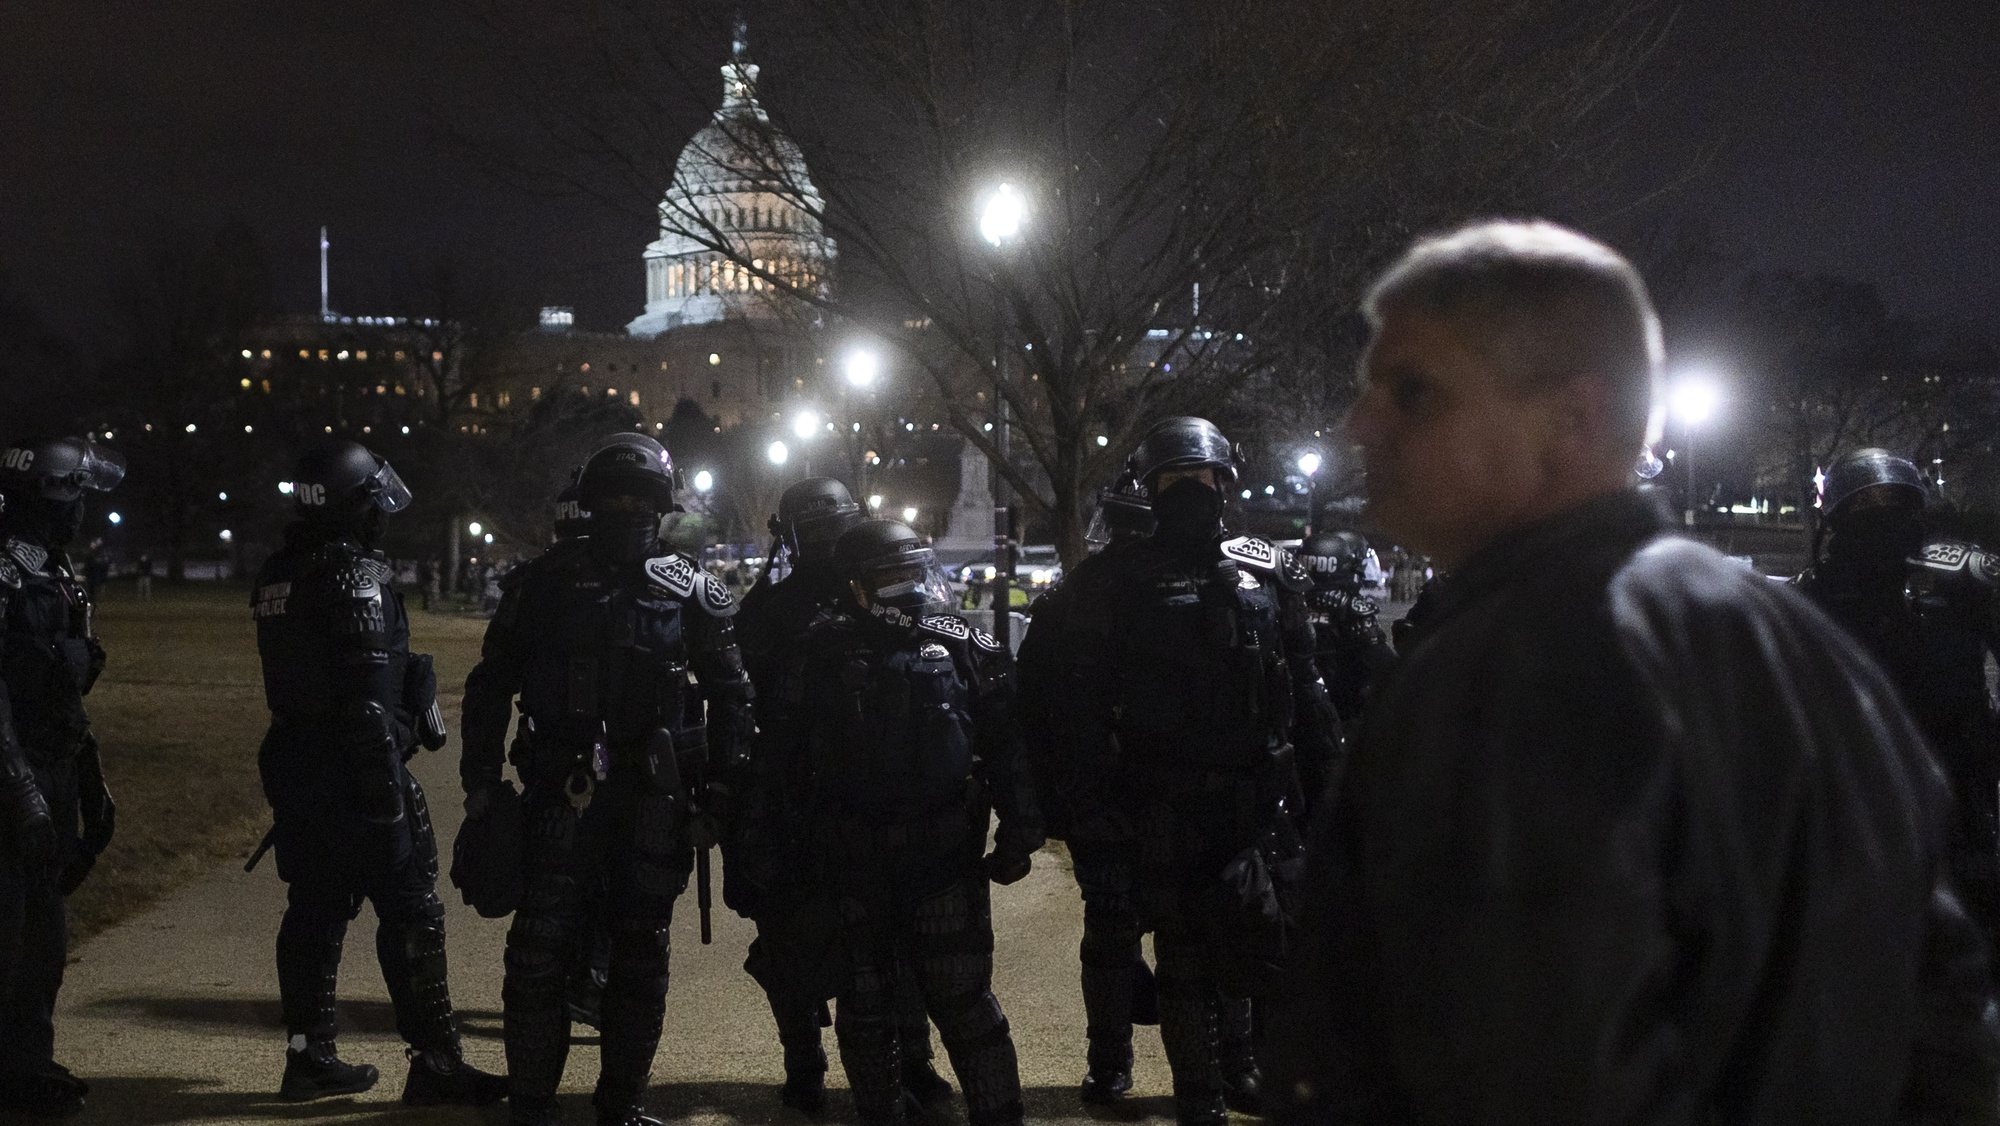 epa08923961 Members of the Metropolitian Police stand guard near the West Front of the US Capitol after pro-Trump protesters stormed the grounds earlier in the day, in Washington, DC, USA, 06 January 2021. Members of Congress returned to the process of certifying the 2020 Electoral College results following more than 6 hours of suspension after various groups of Trump supporters broke into the US Capitol.  EPA/JUSTIN LANE